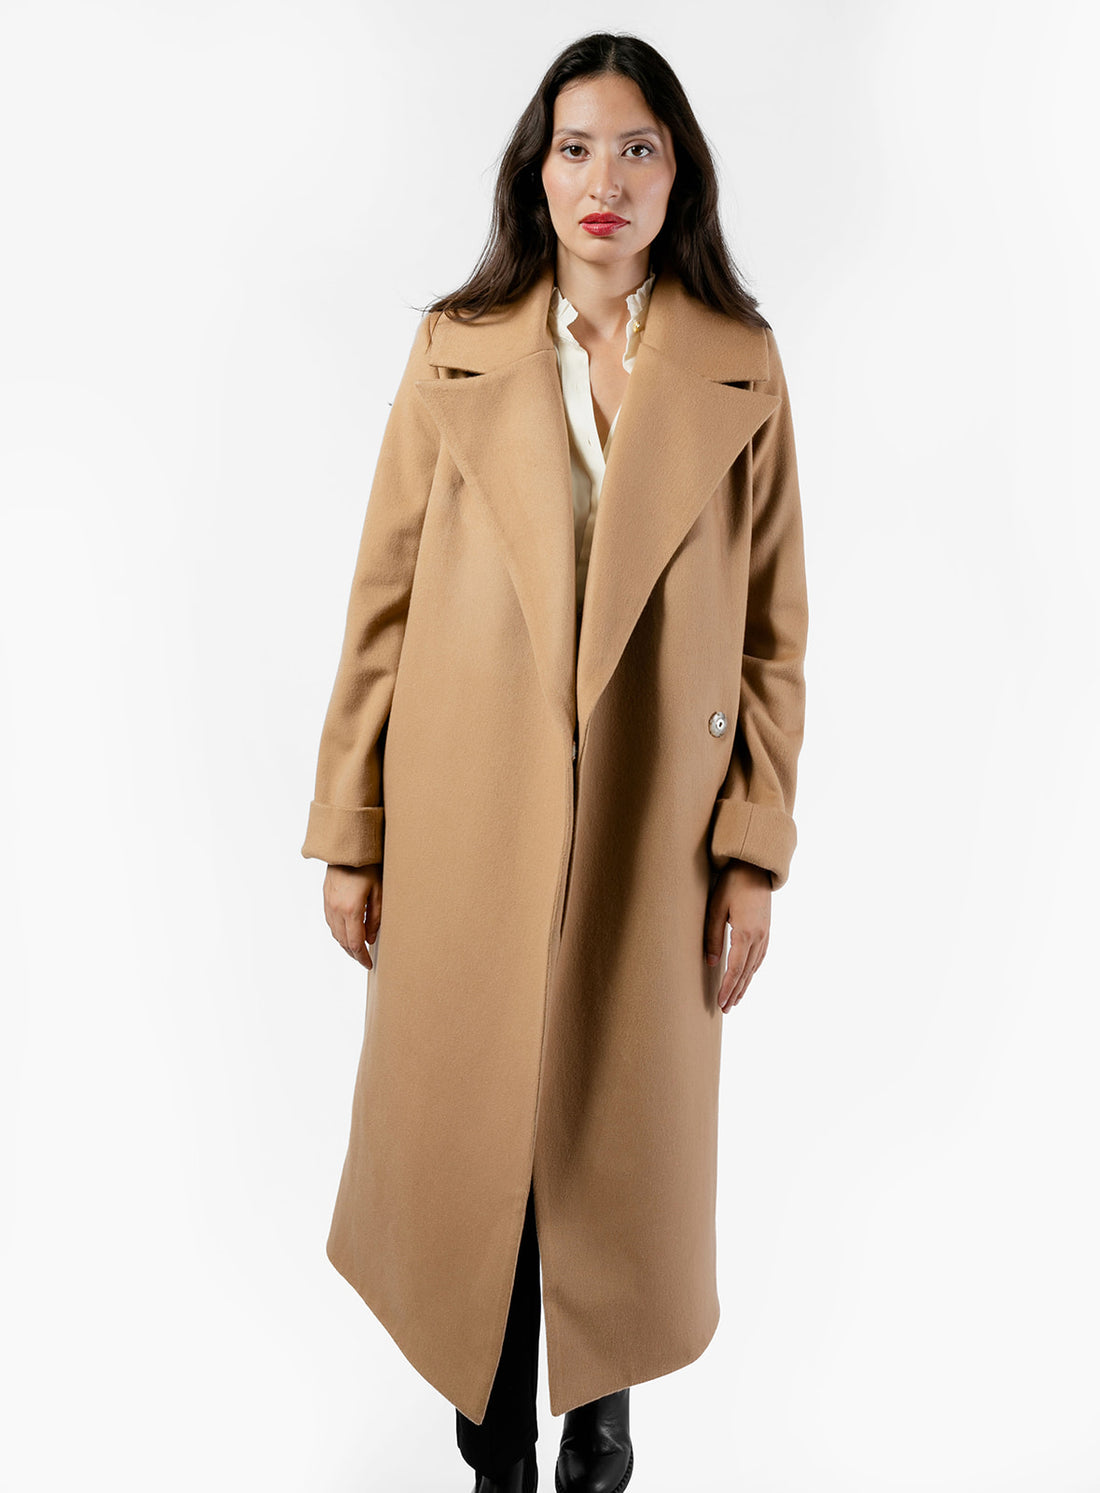 The Dearborn Overcoat - Camel